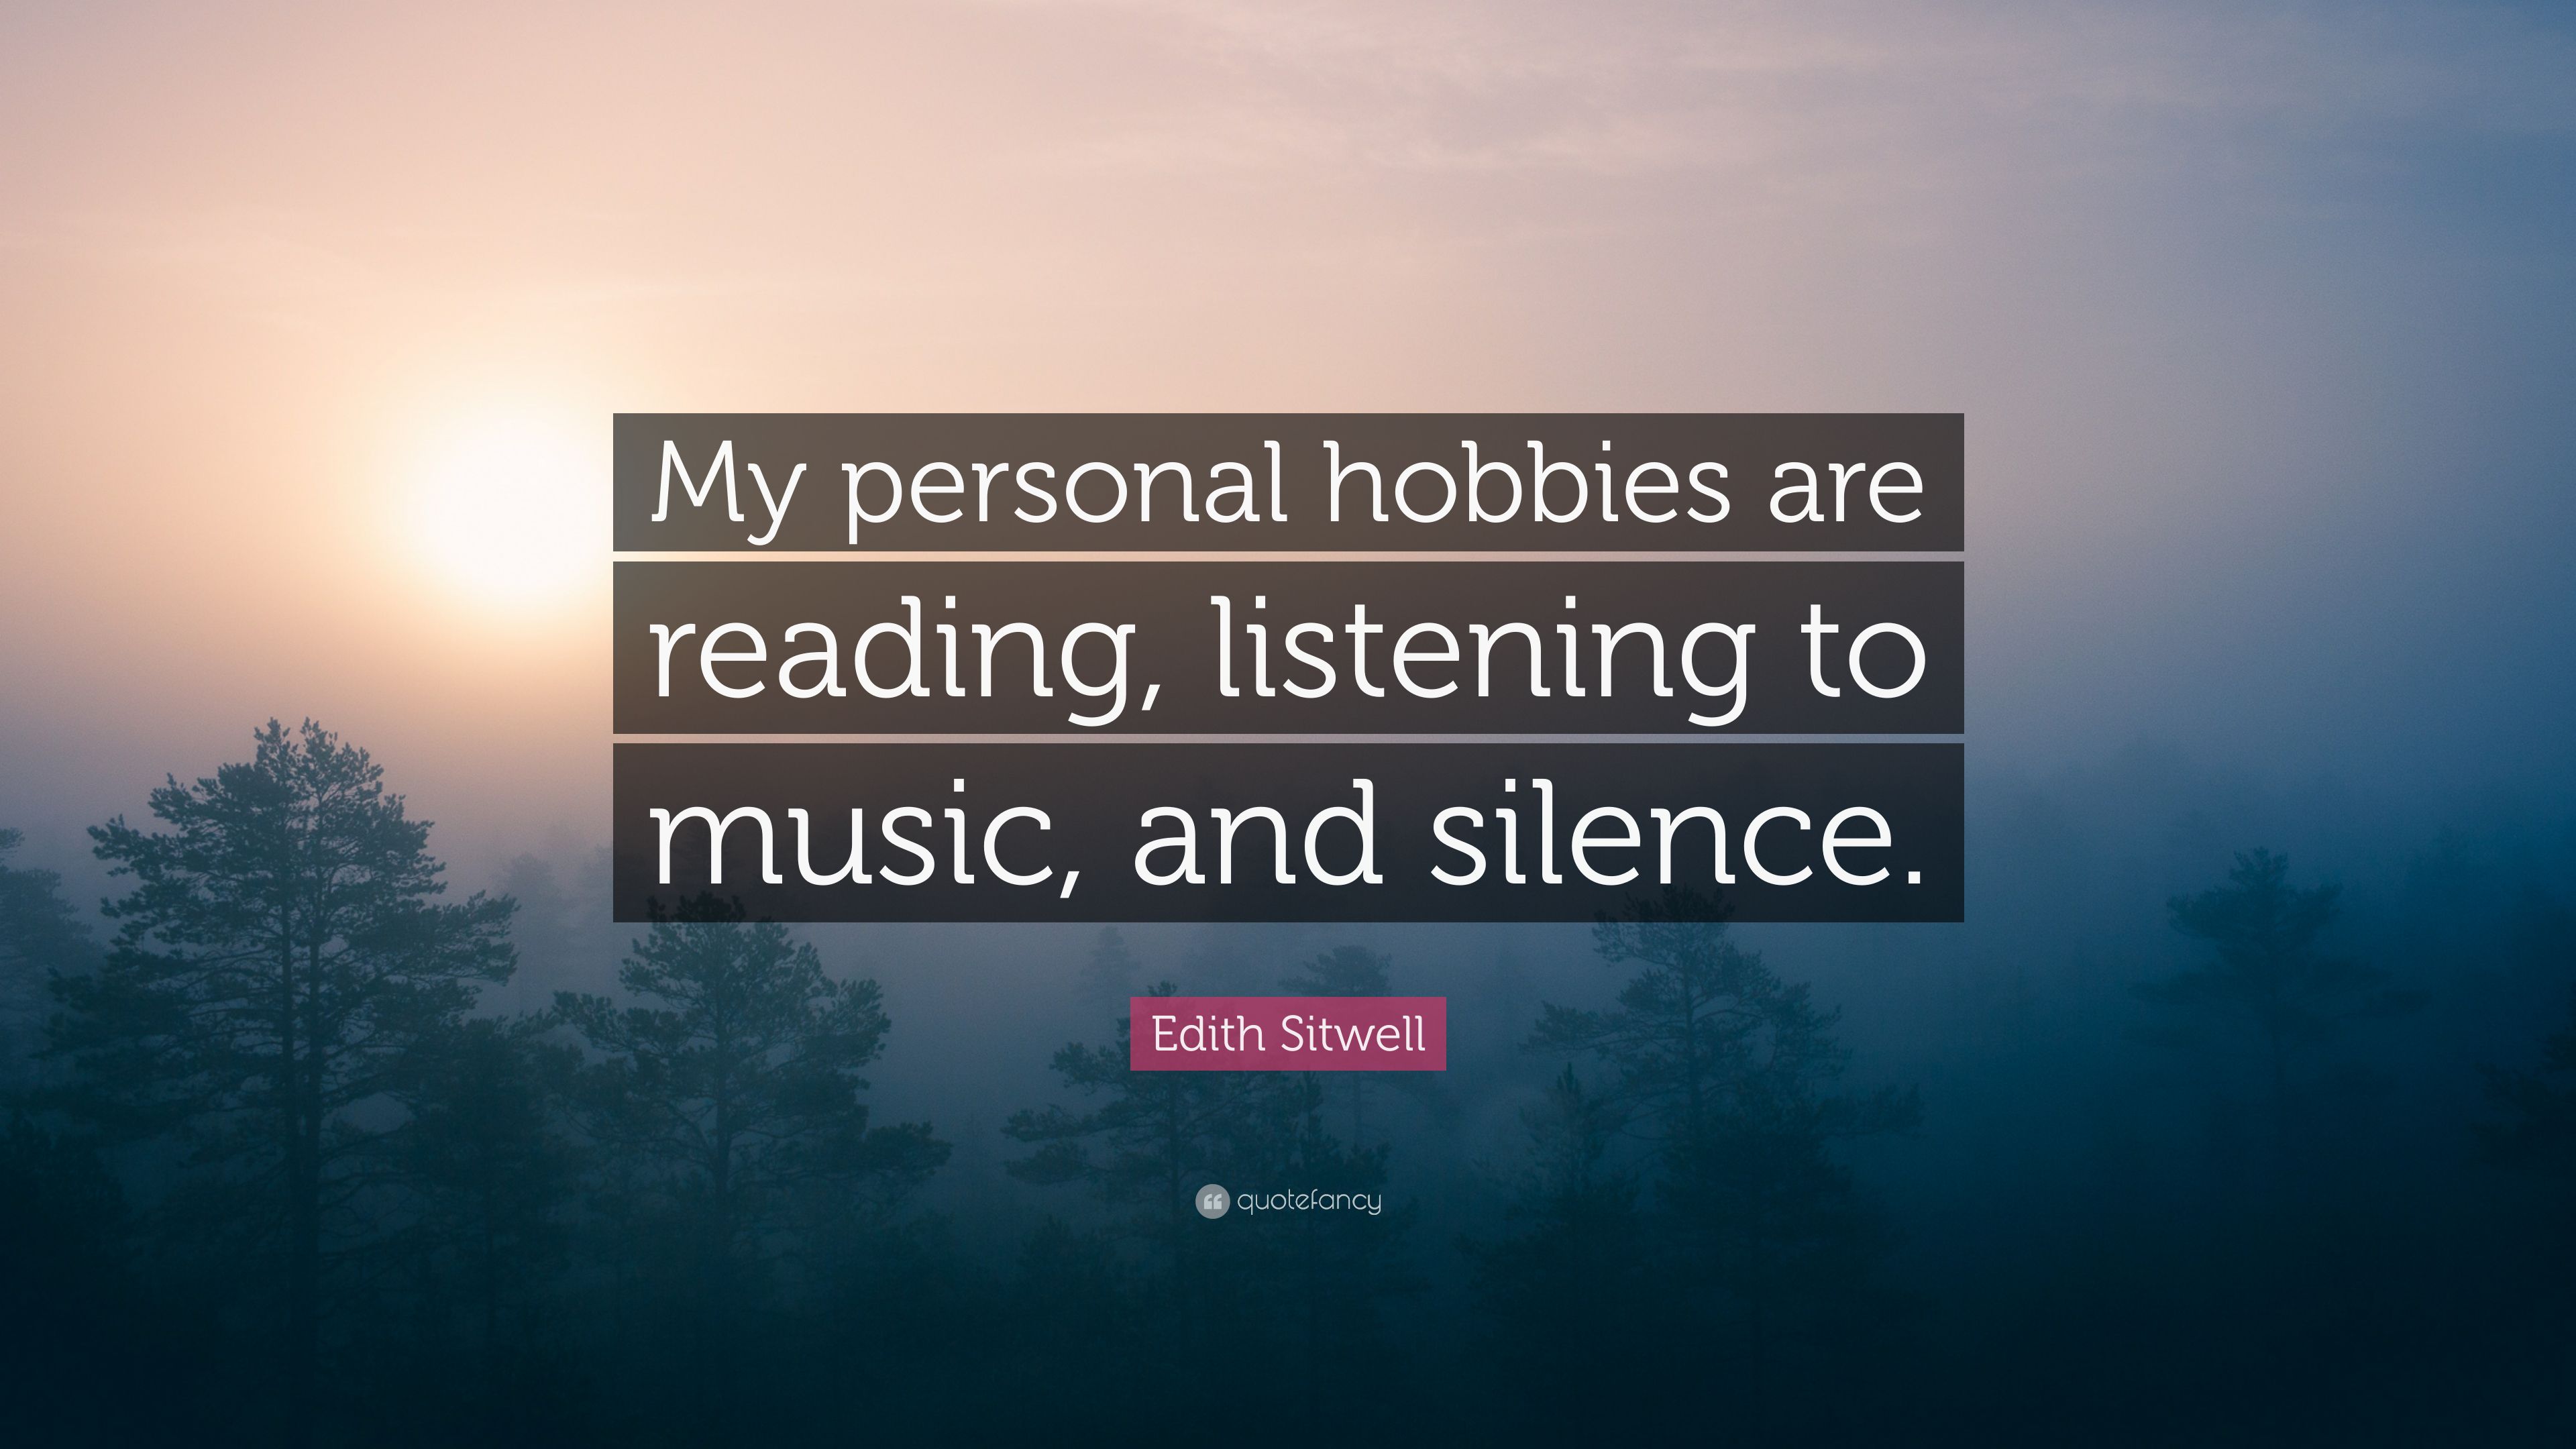 Edith Sitwell Quote: “My personal hobbies are reading, listening